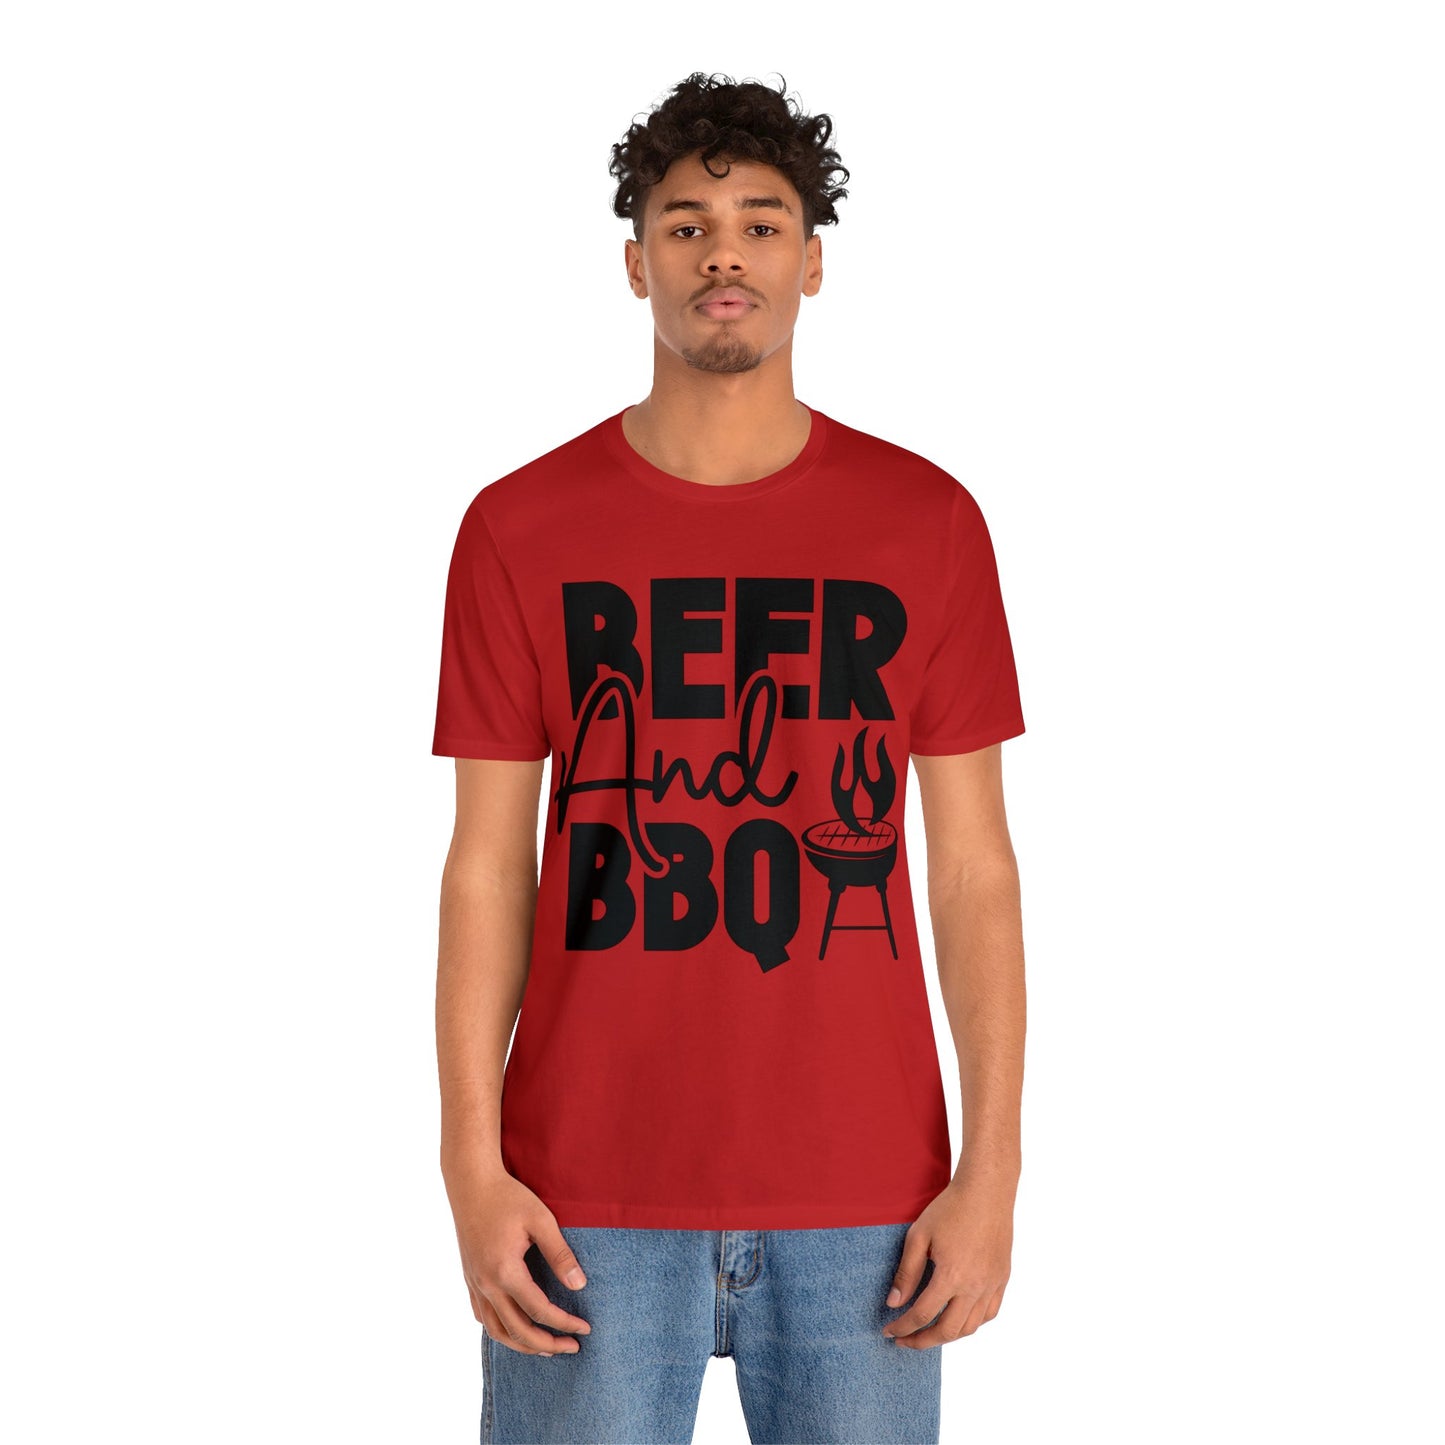 Beer and bbq  T-Shirt